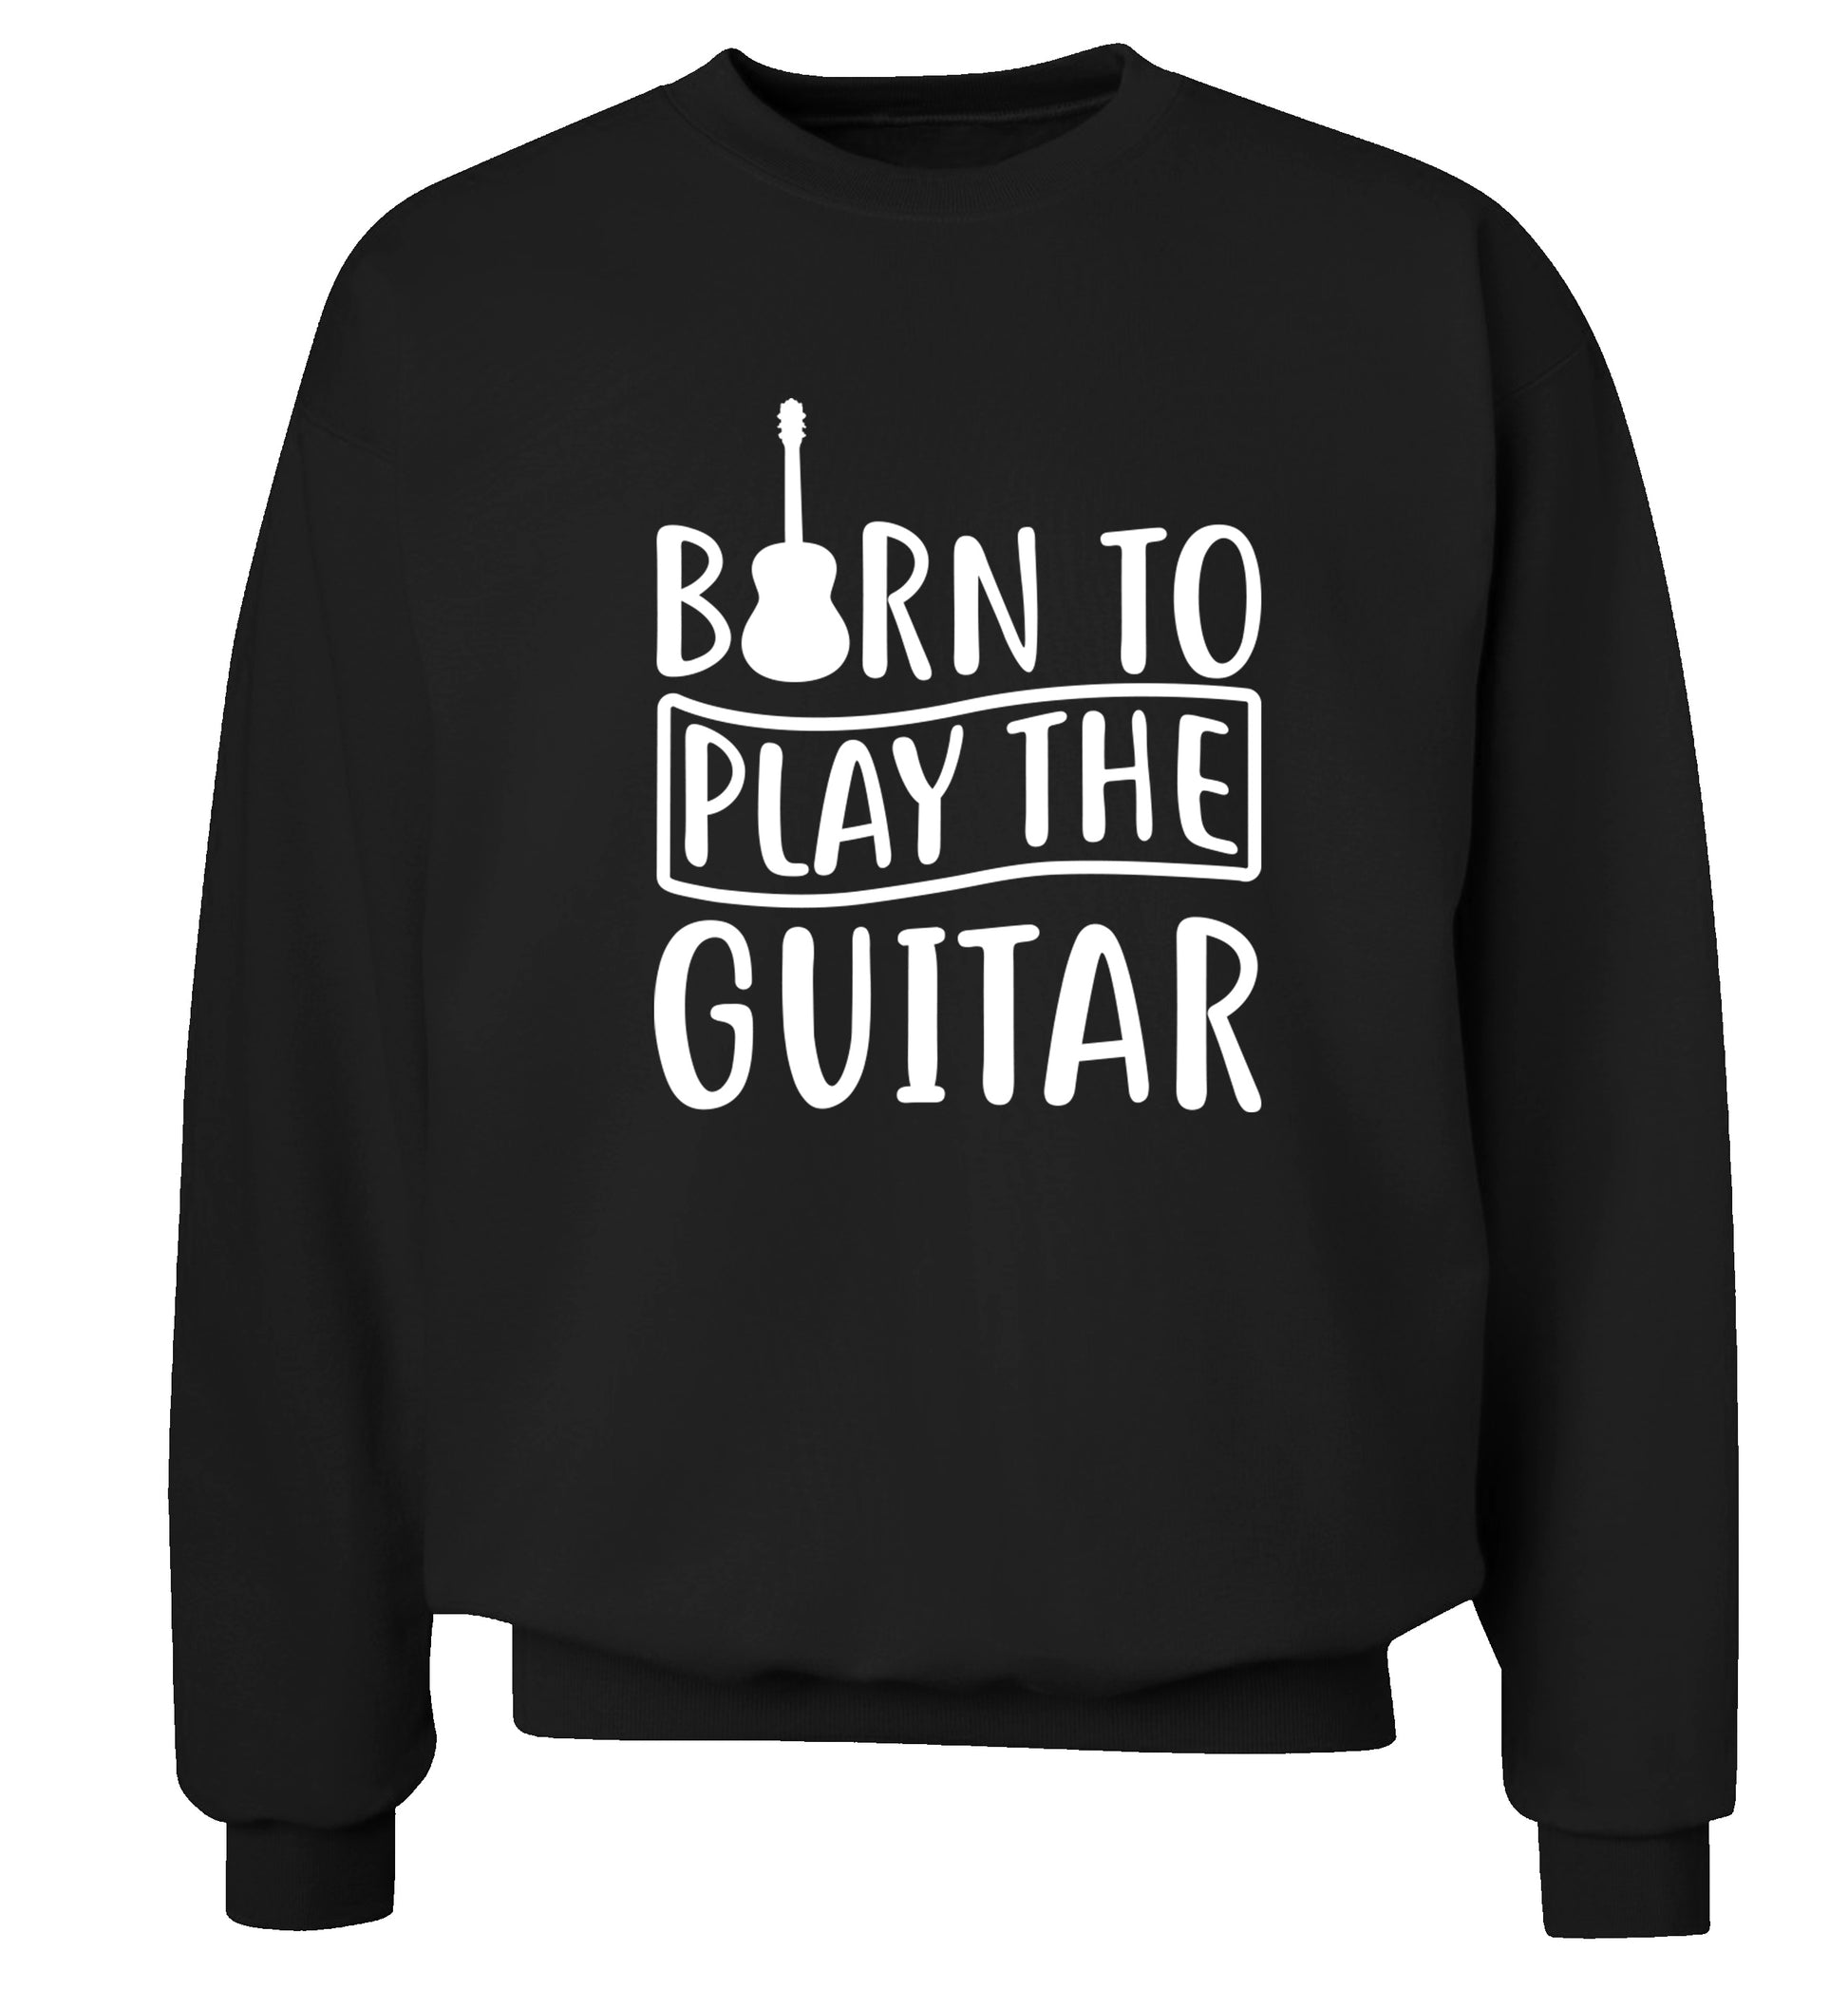 Born to play the guitar Adult's unisex black Sweater 2XL